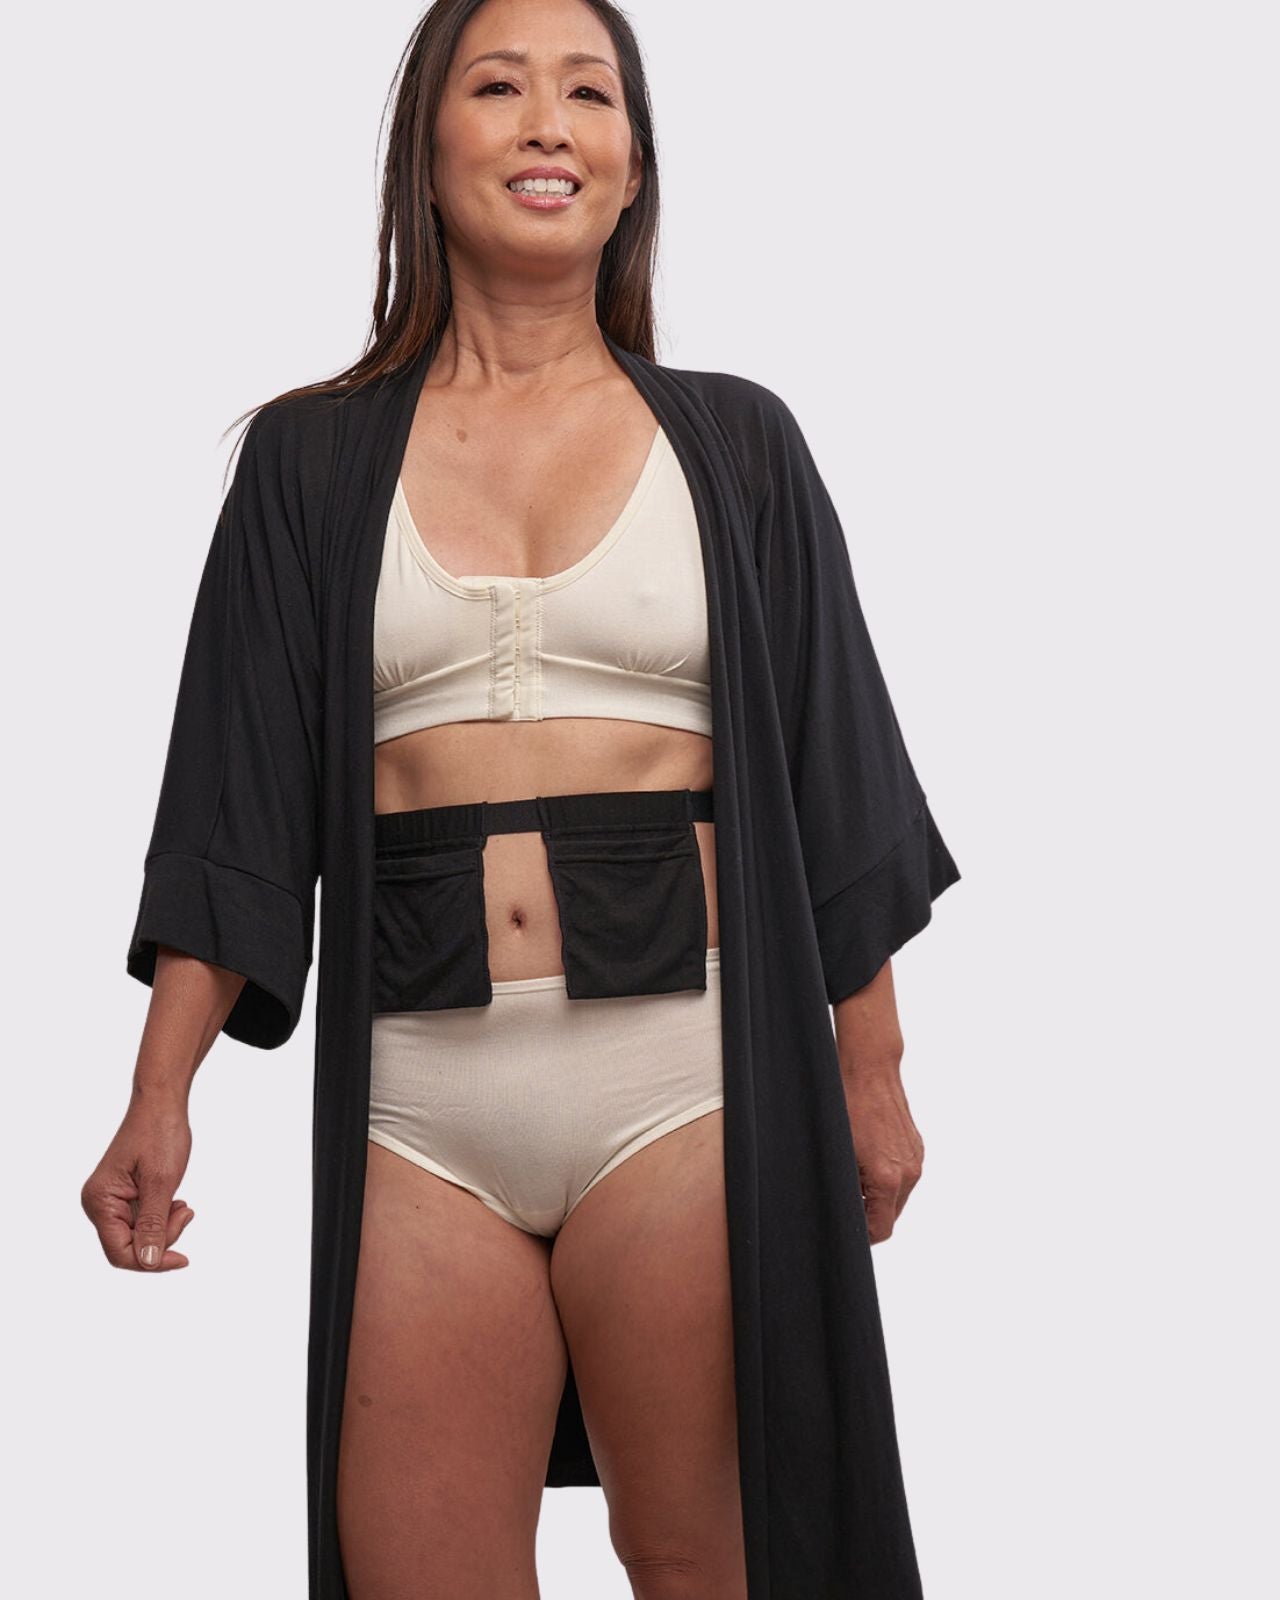 The Miena Robe with Drain Management Belt